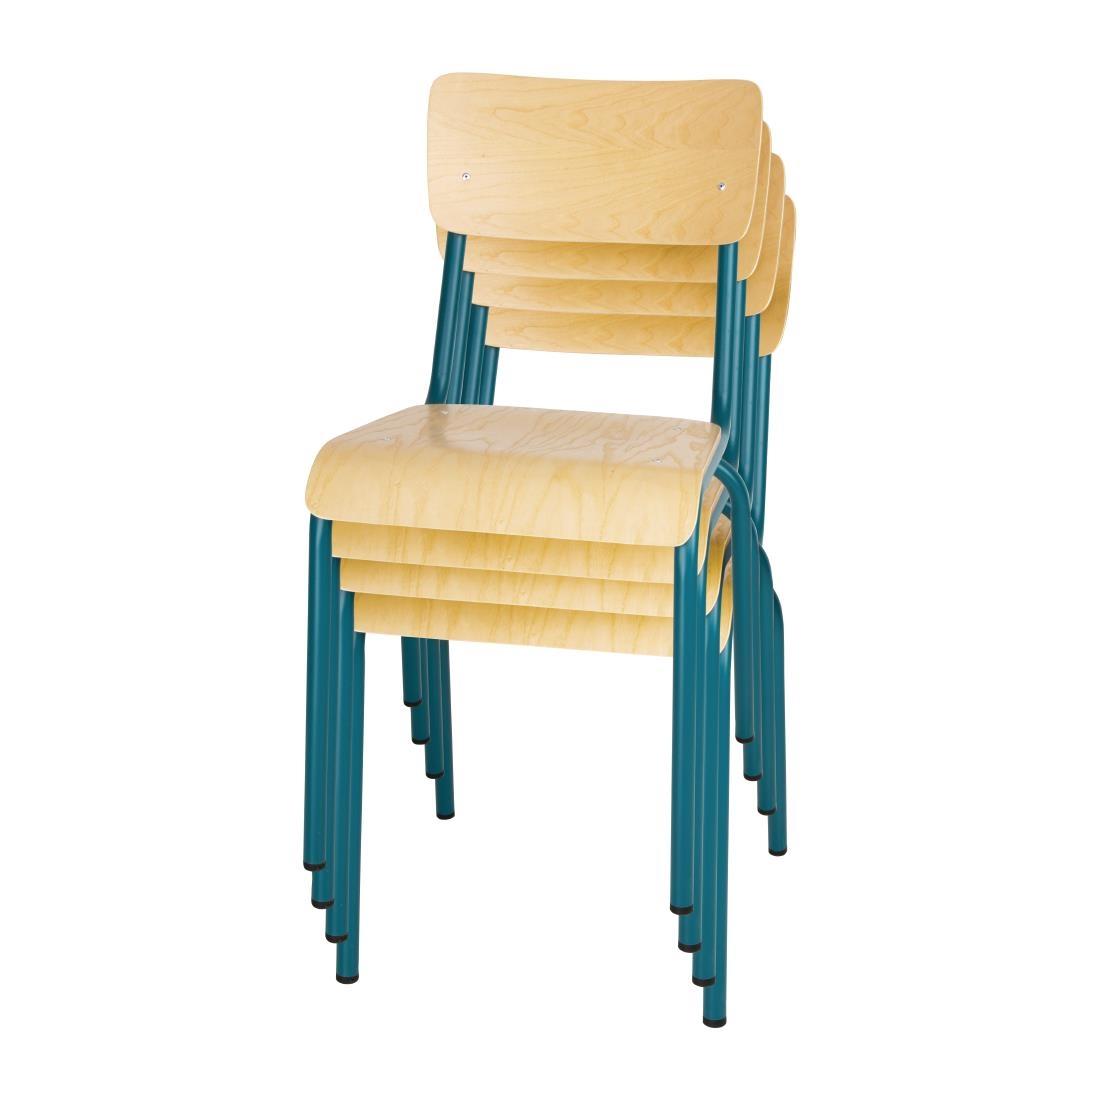 Bolero Cantina Side Chairs with Wooden Seat Pad and Backrest Teal (Pack of 4) - FB944  - 5